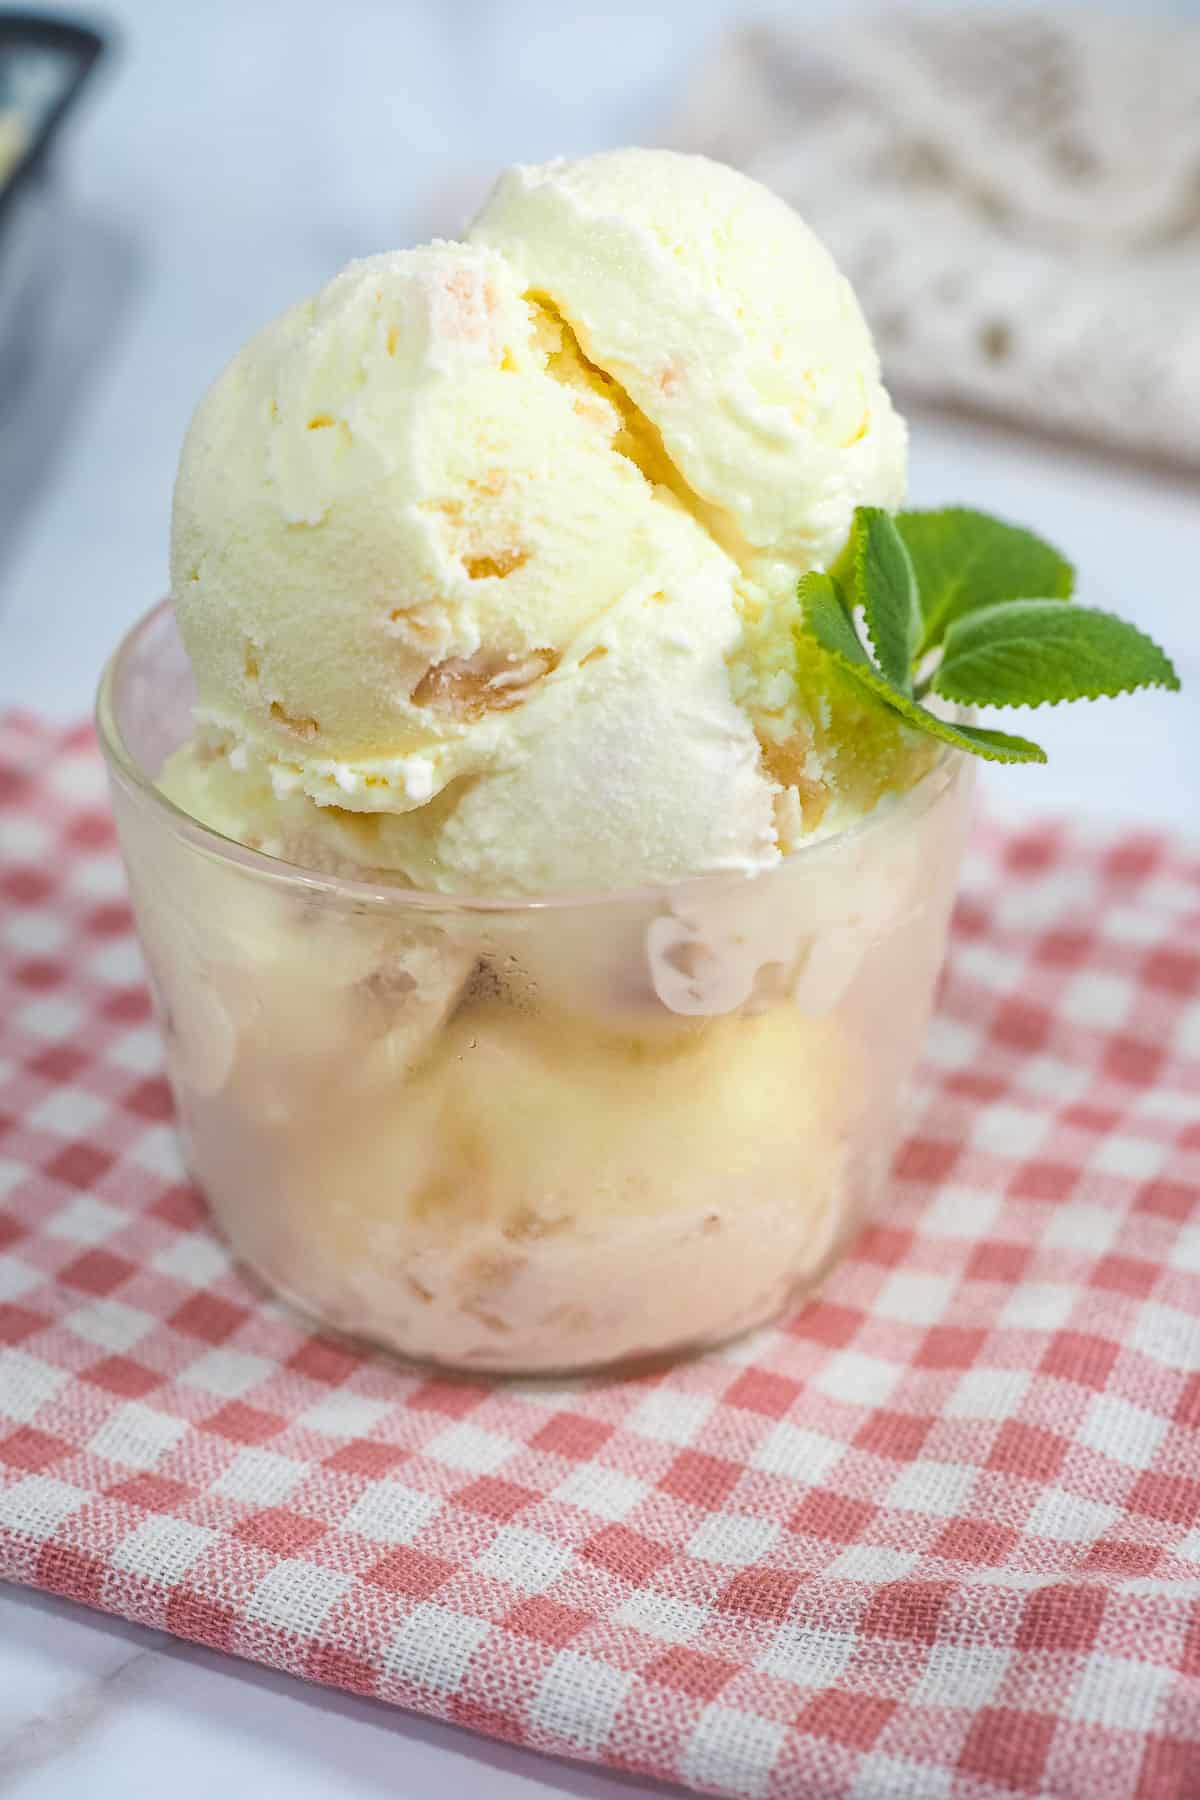 Lychee ice cream scoops in a glass bowl and decorated with mint leaves.